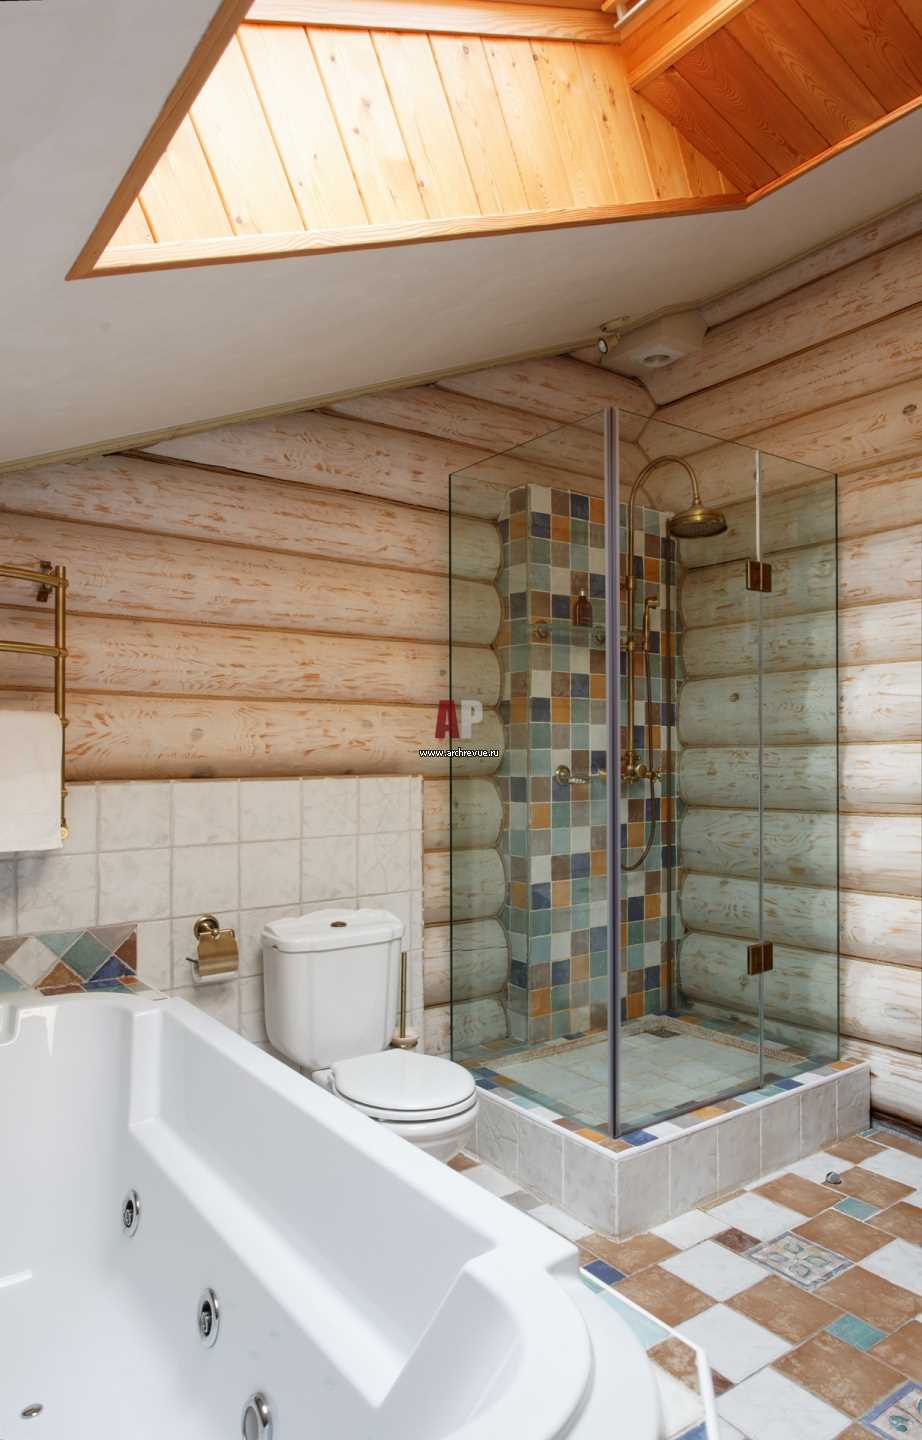 idea of ​​an unusual style of a bathroom in a wooden house